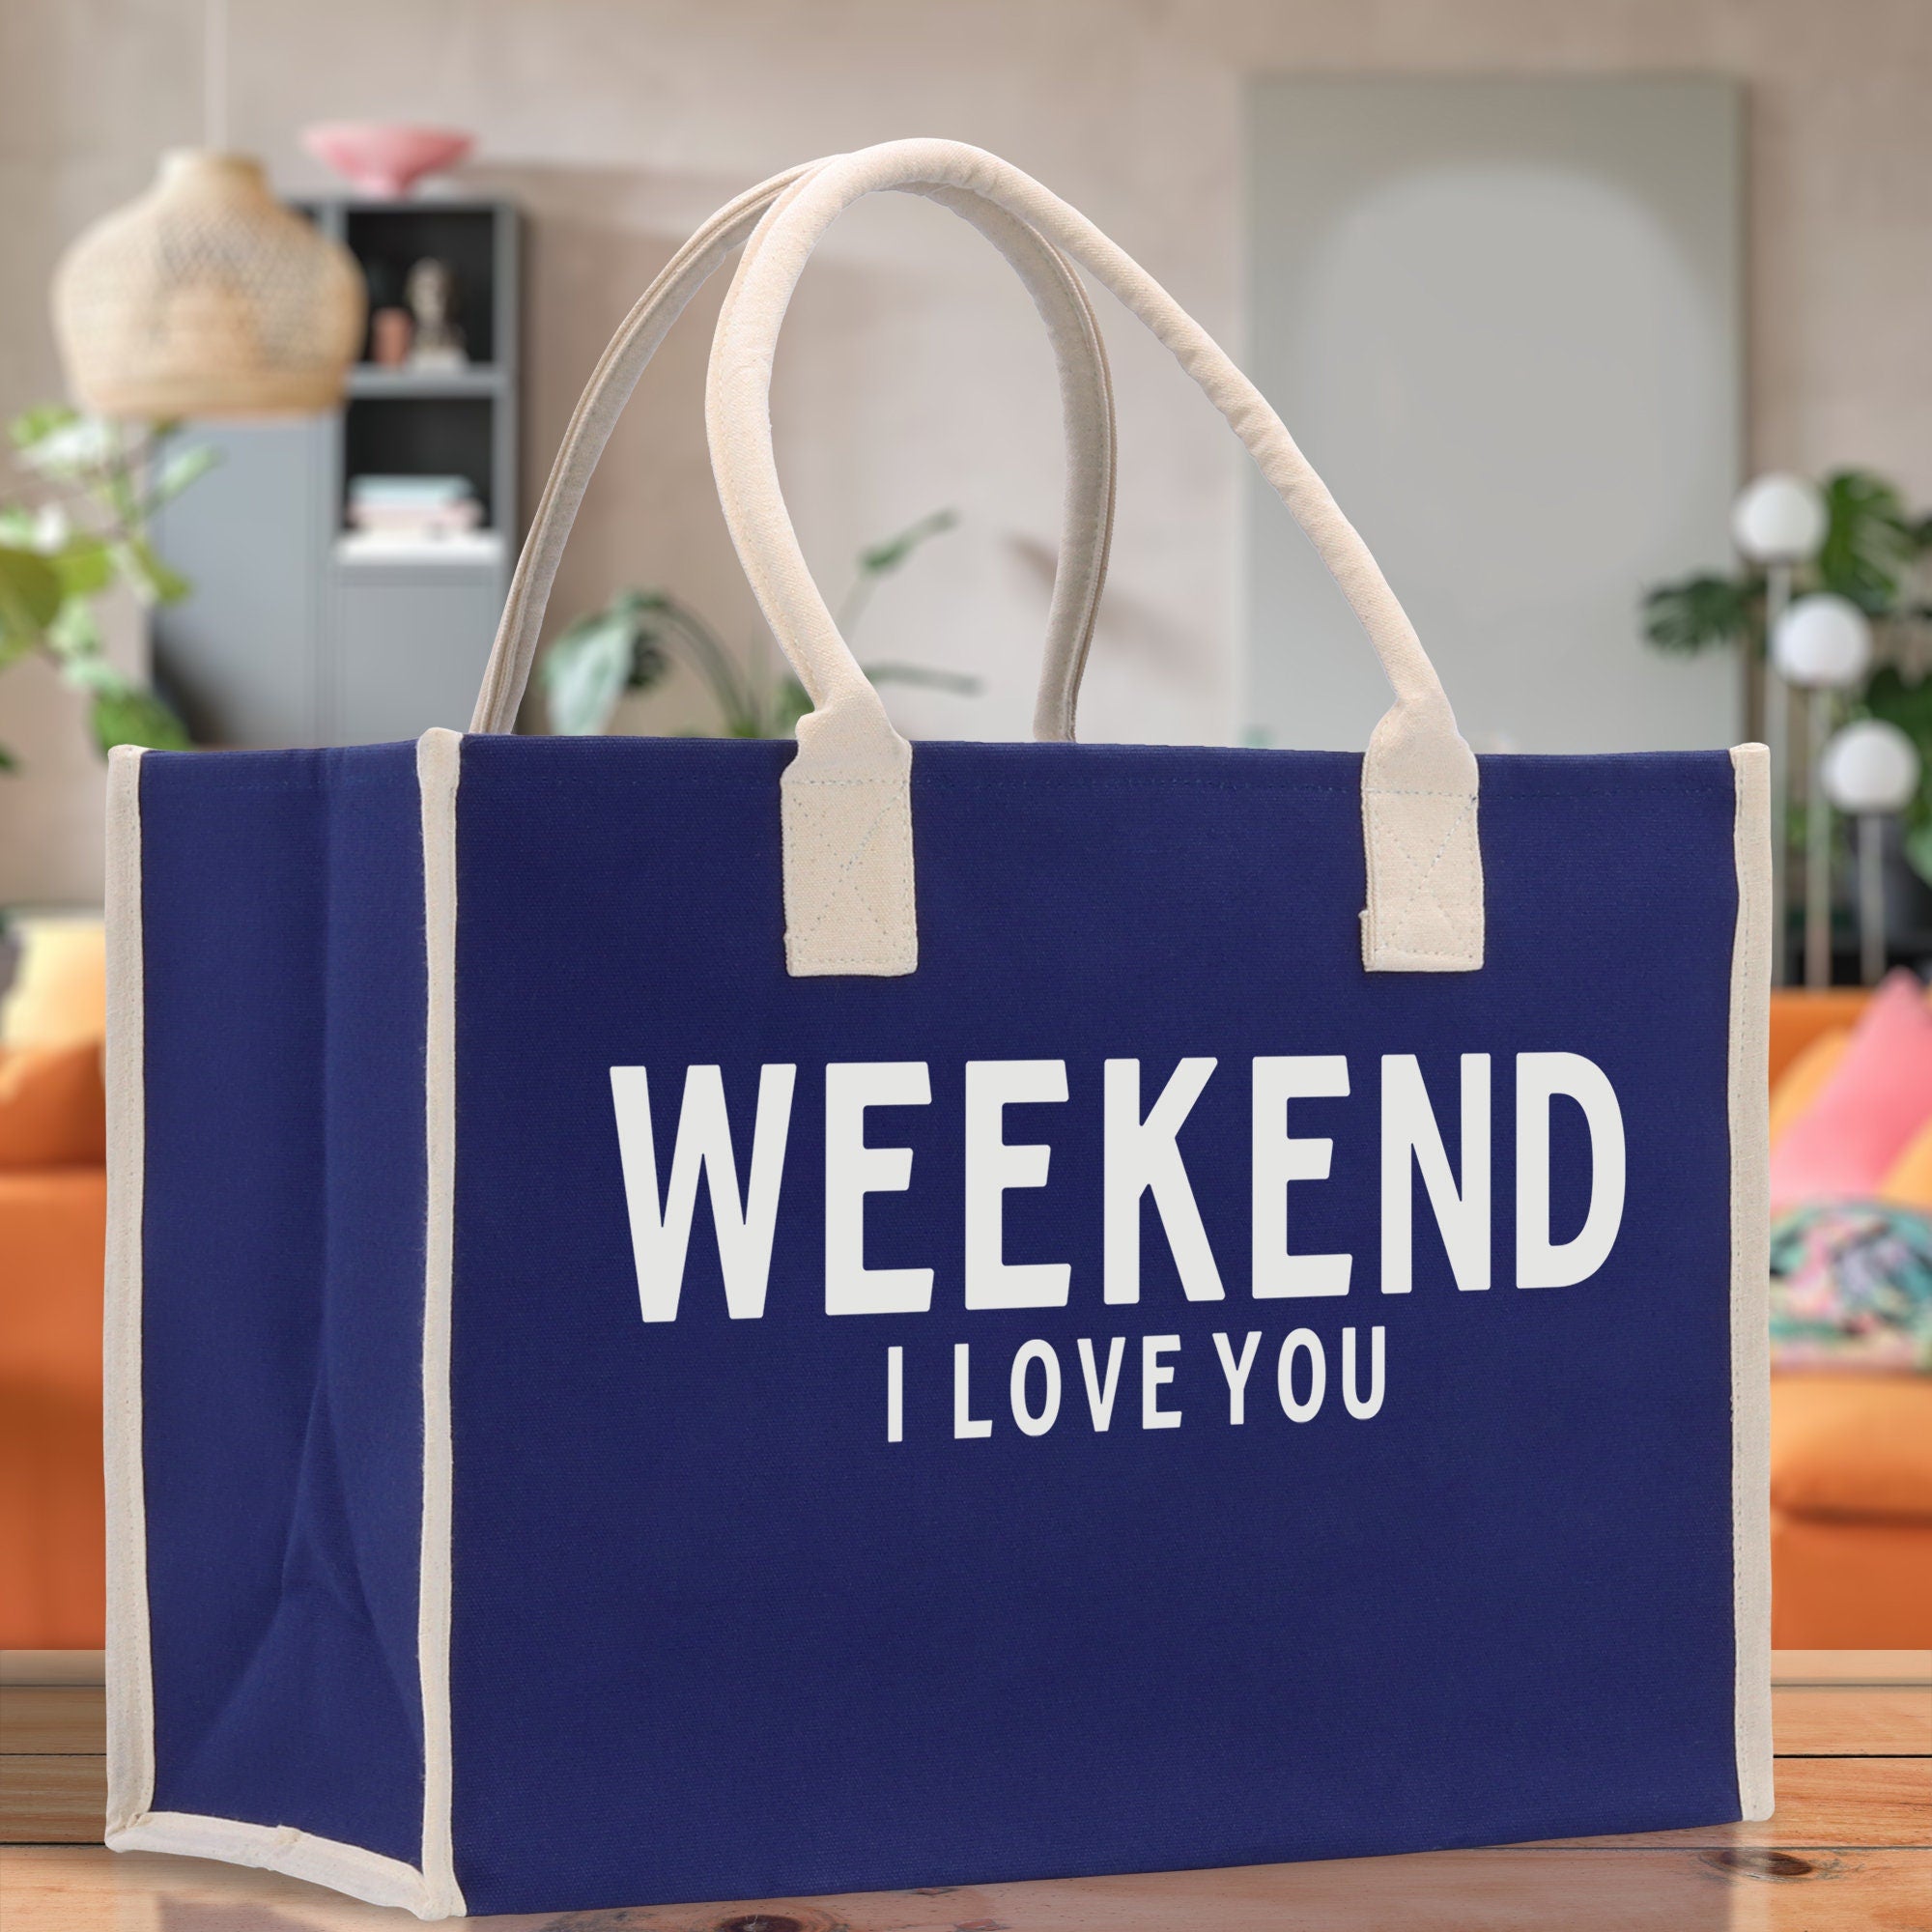 Weekend I Love Cotton Canvas Chic Beach Tote Bag Multipurpose Tote Weekender Tote Gift for Her Outdoor Tote Vacation Tote Large Beach Bag